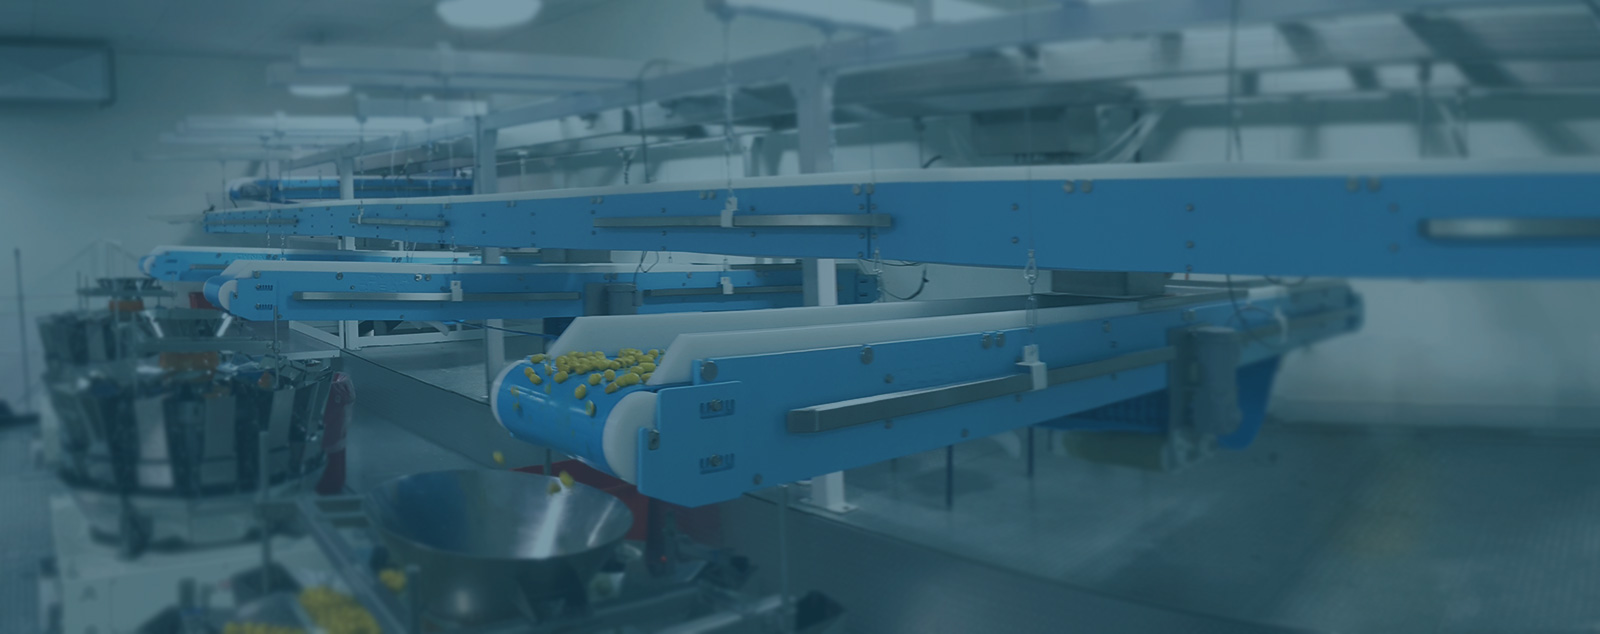 DynaClean conveyor moving objects from one area to another